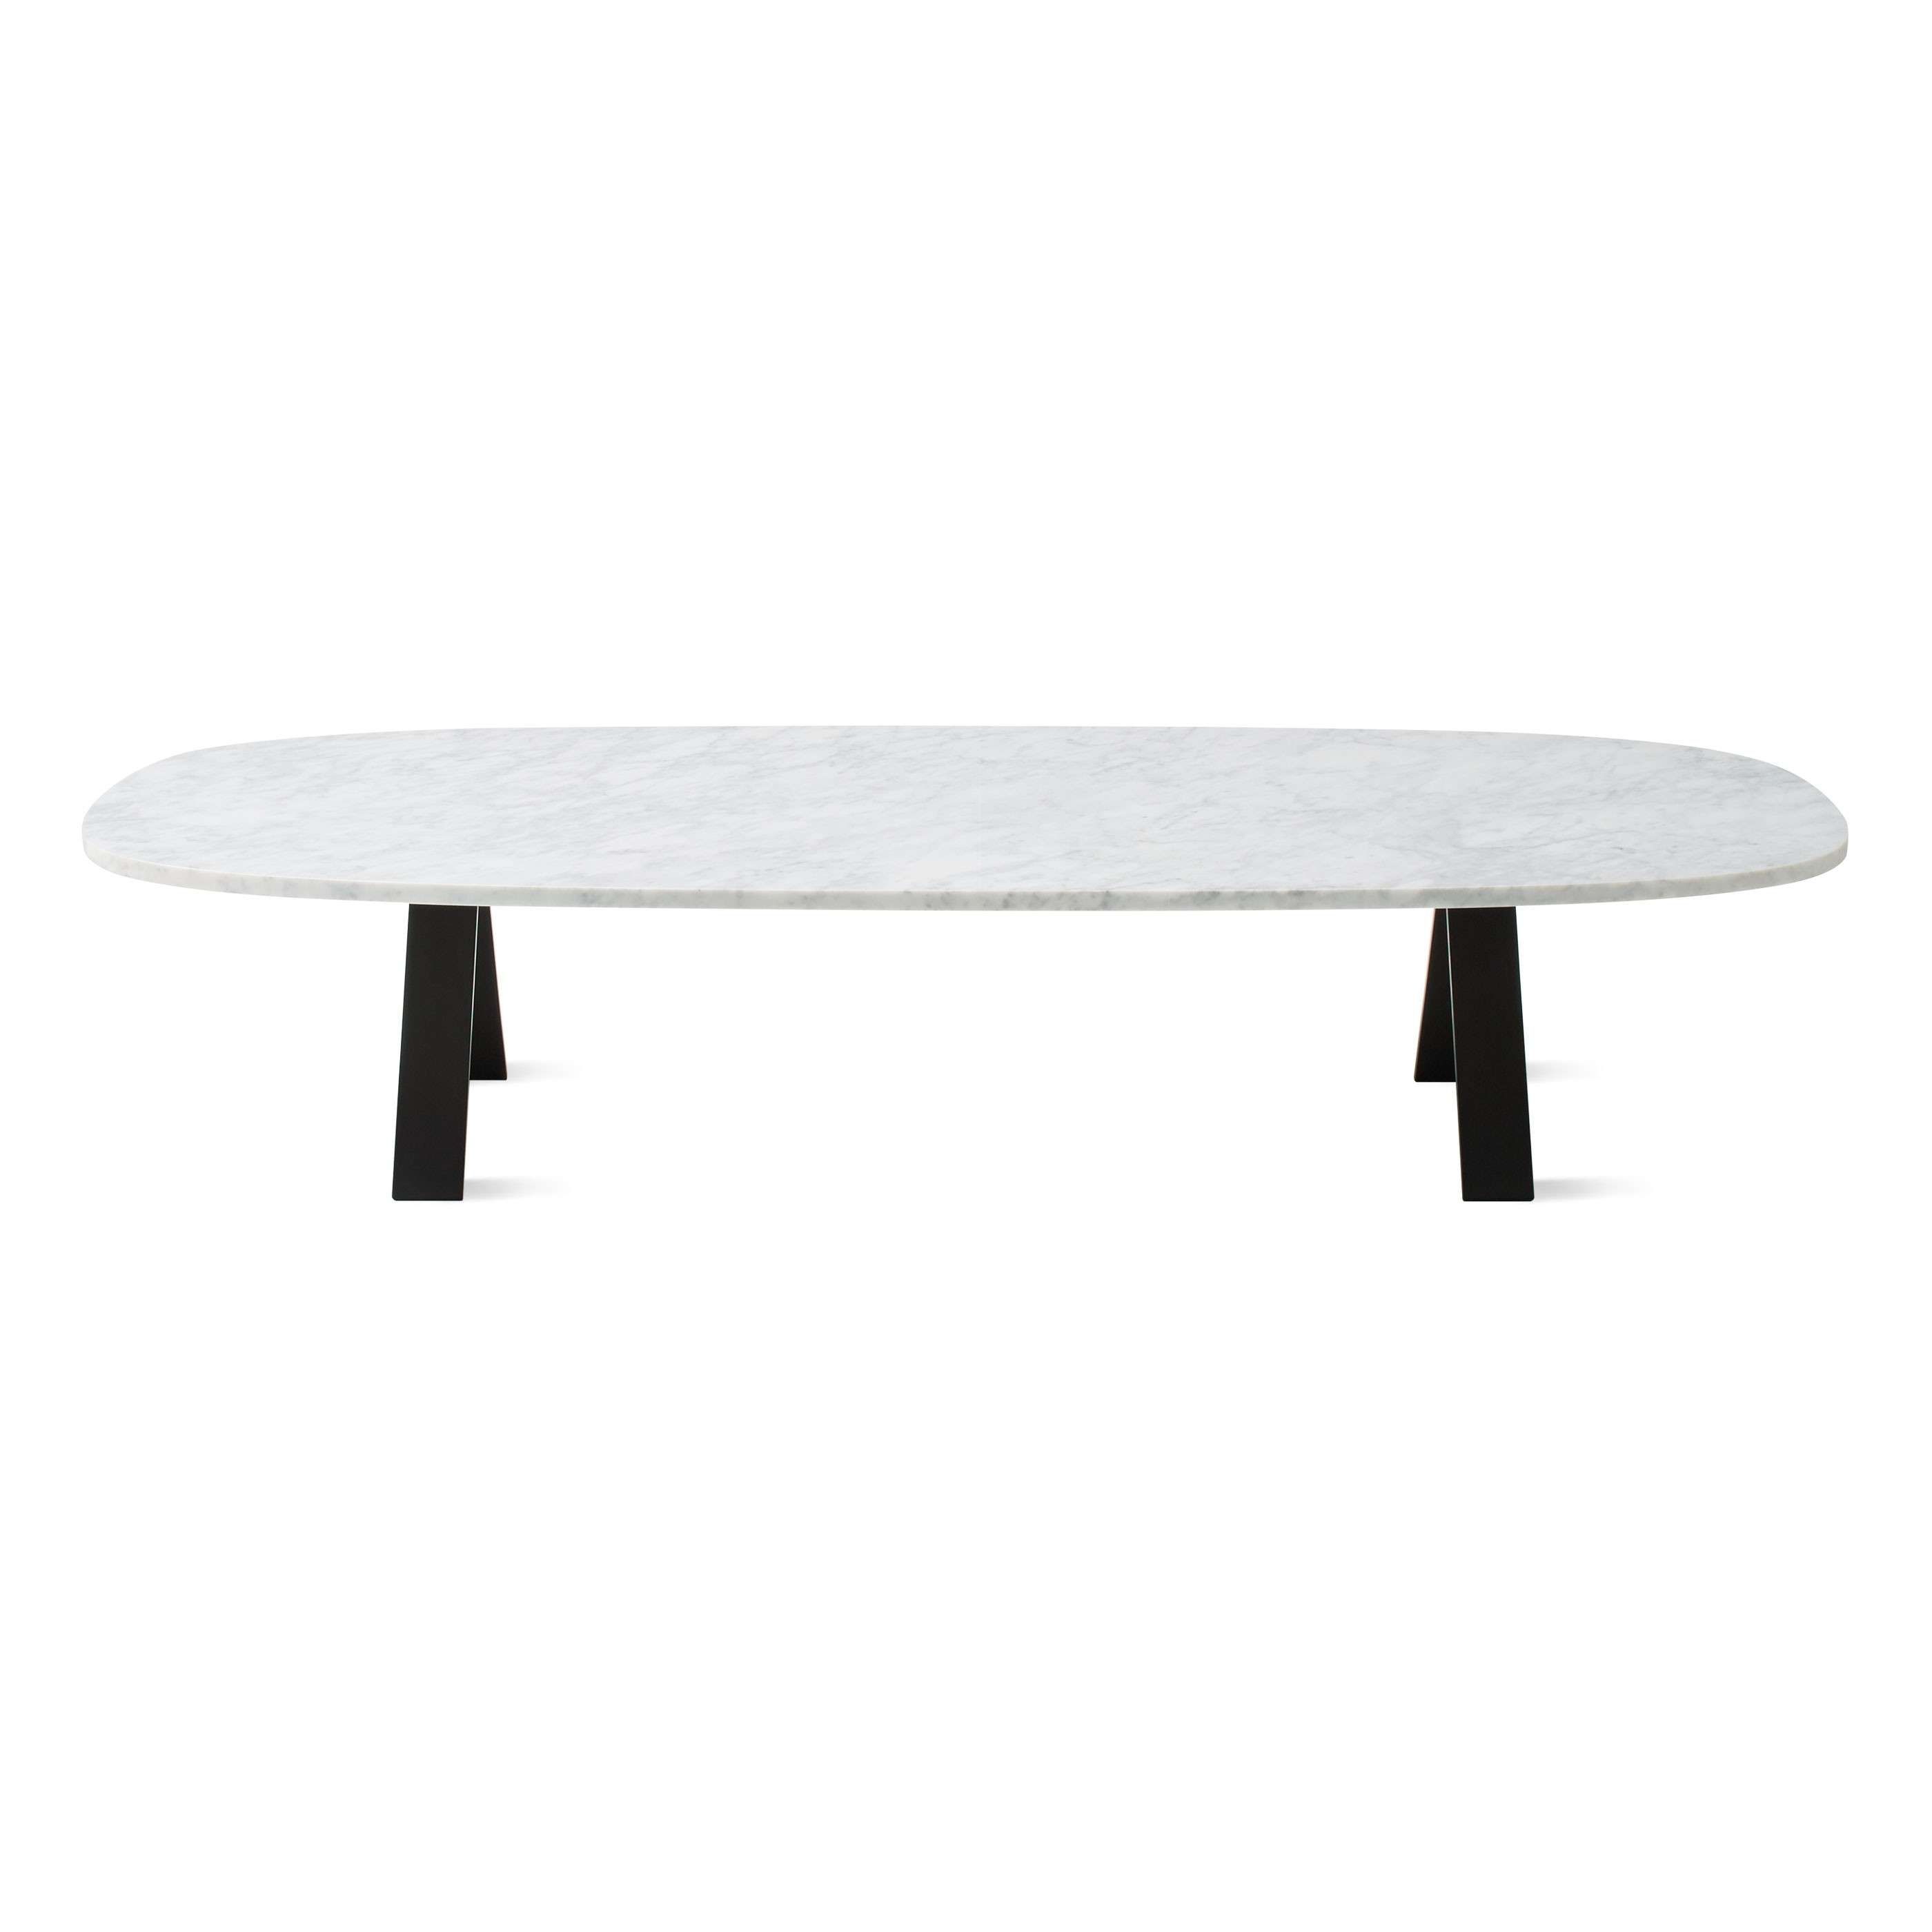 Blu Dot Throughout Well Known Black Oval Coffee Tables (Gallery 13 of 20)